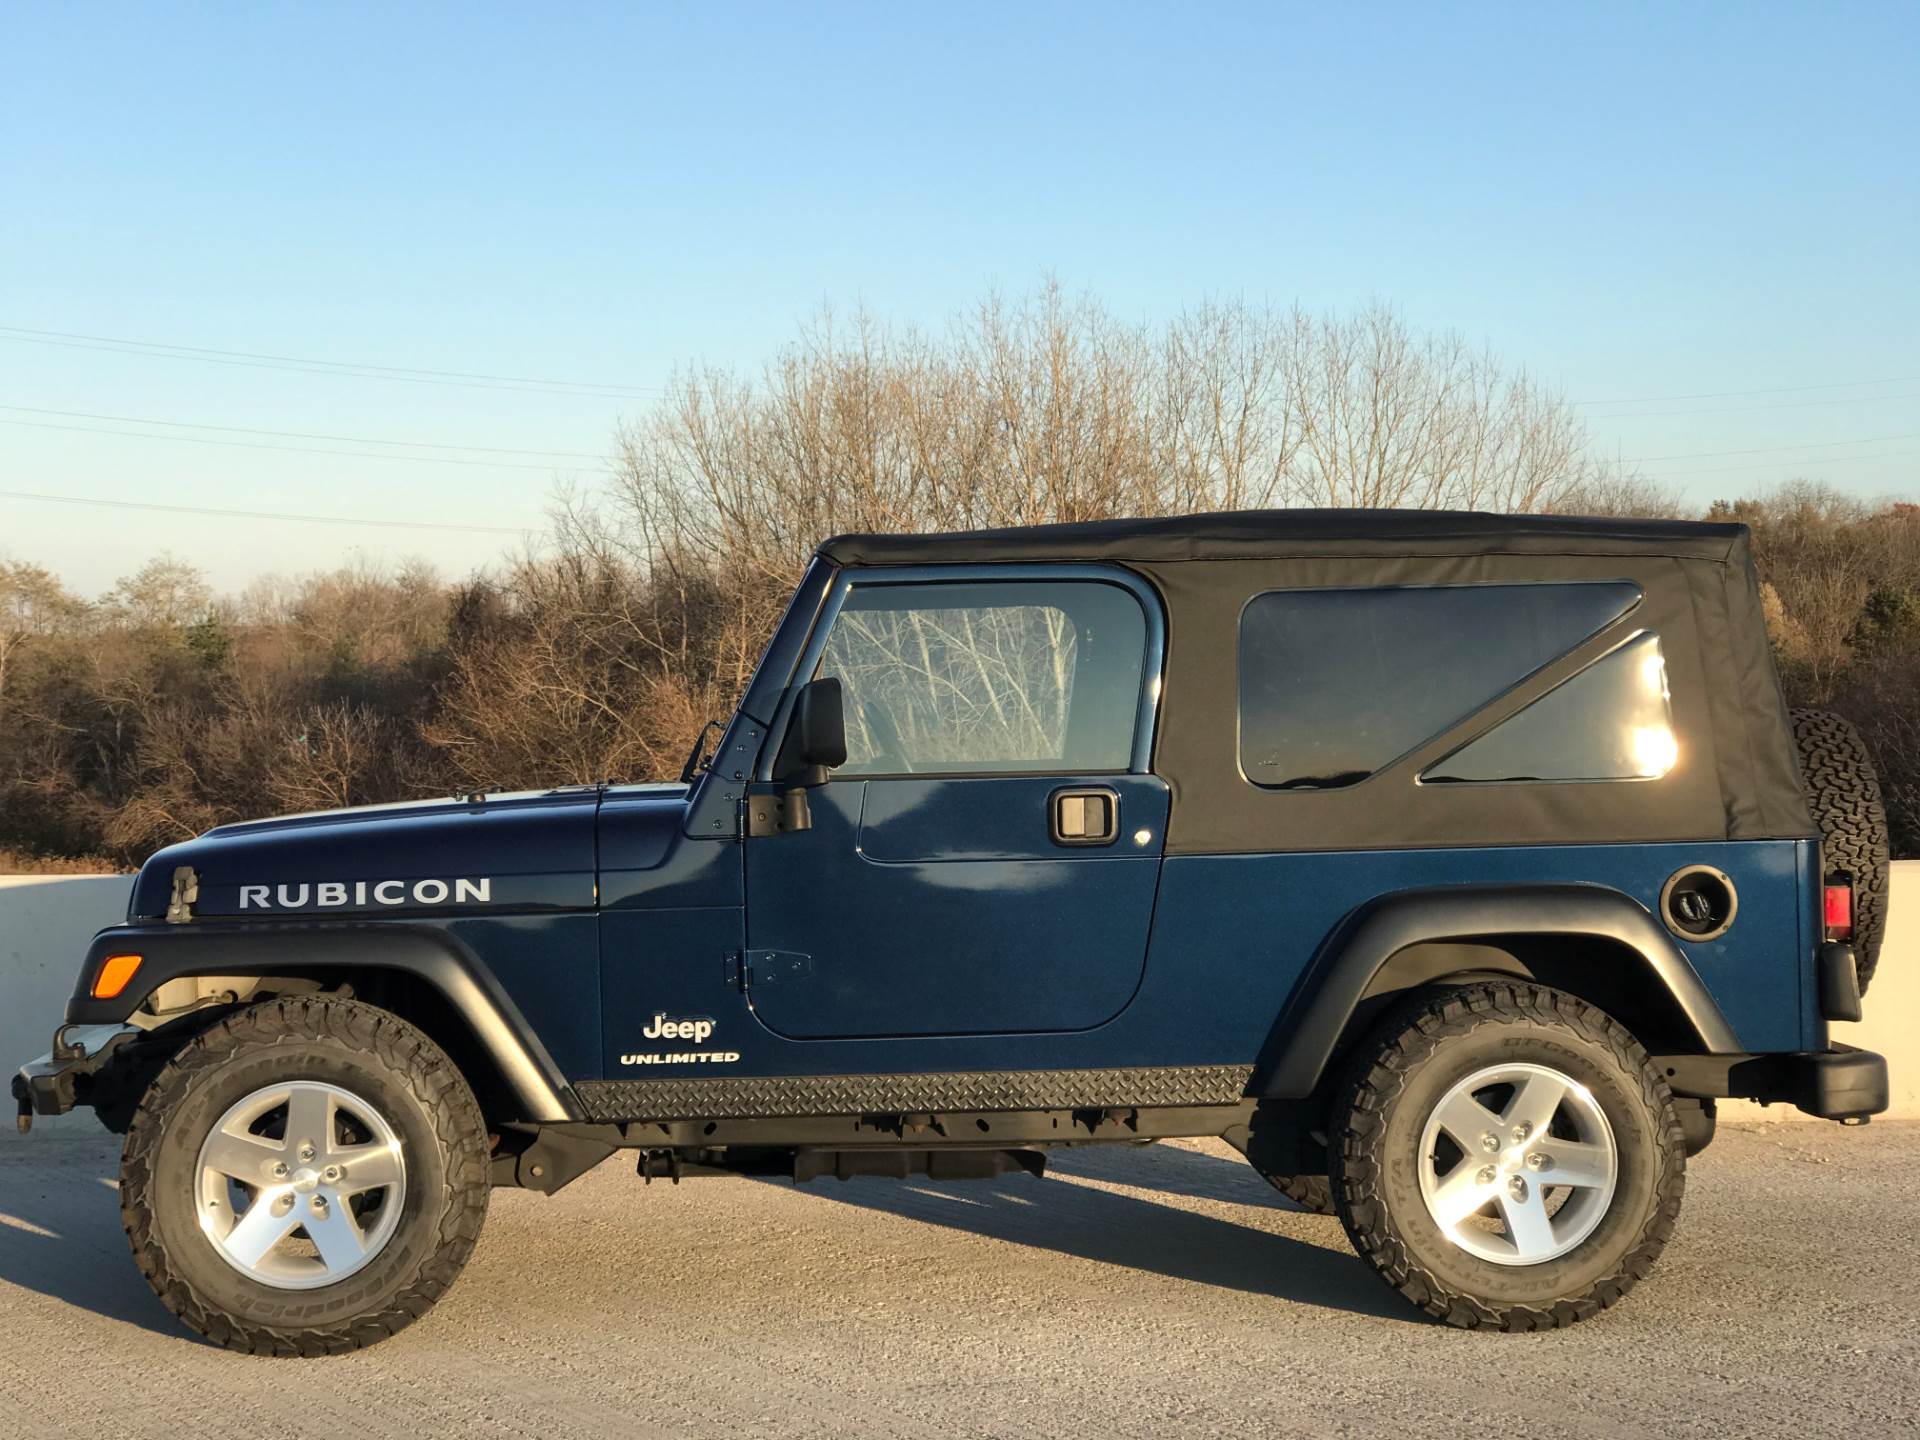 2006 Jeep Wrangler Unlimited Rubicon 2dr SUV 4WD in Big Bend, Wisconsin - Photo 104